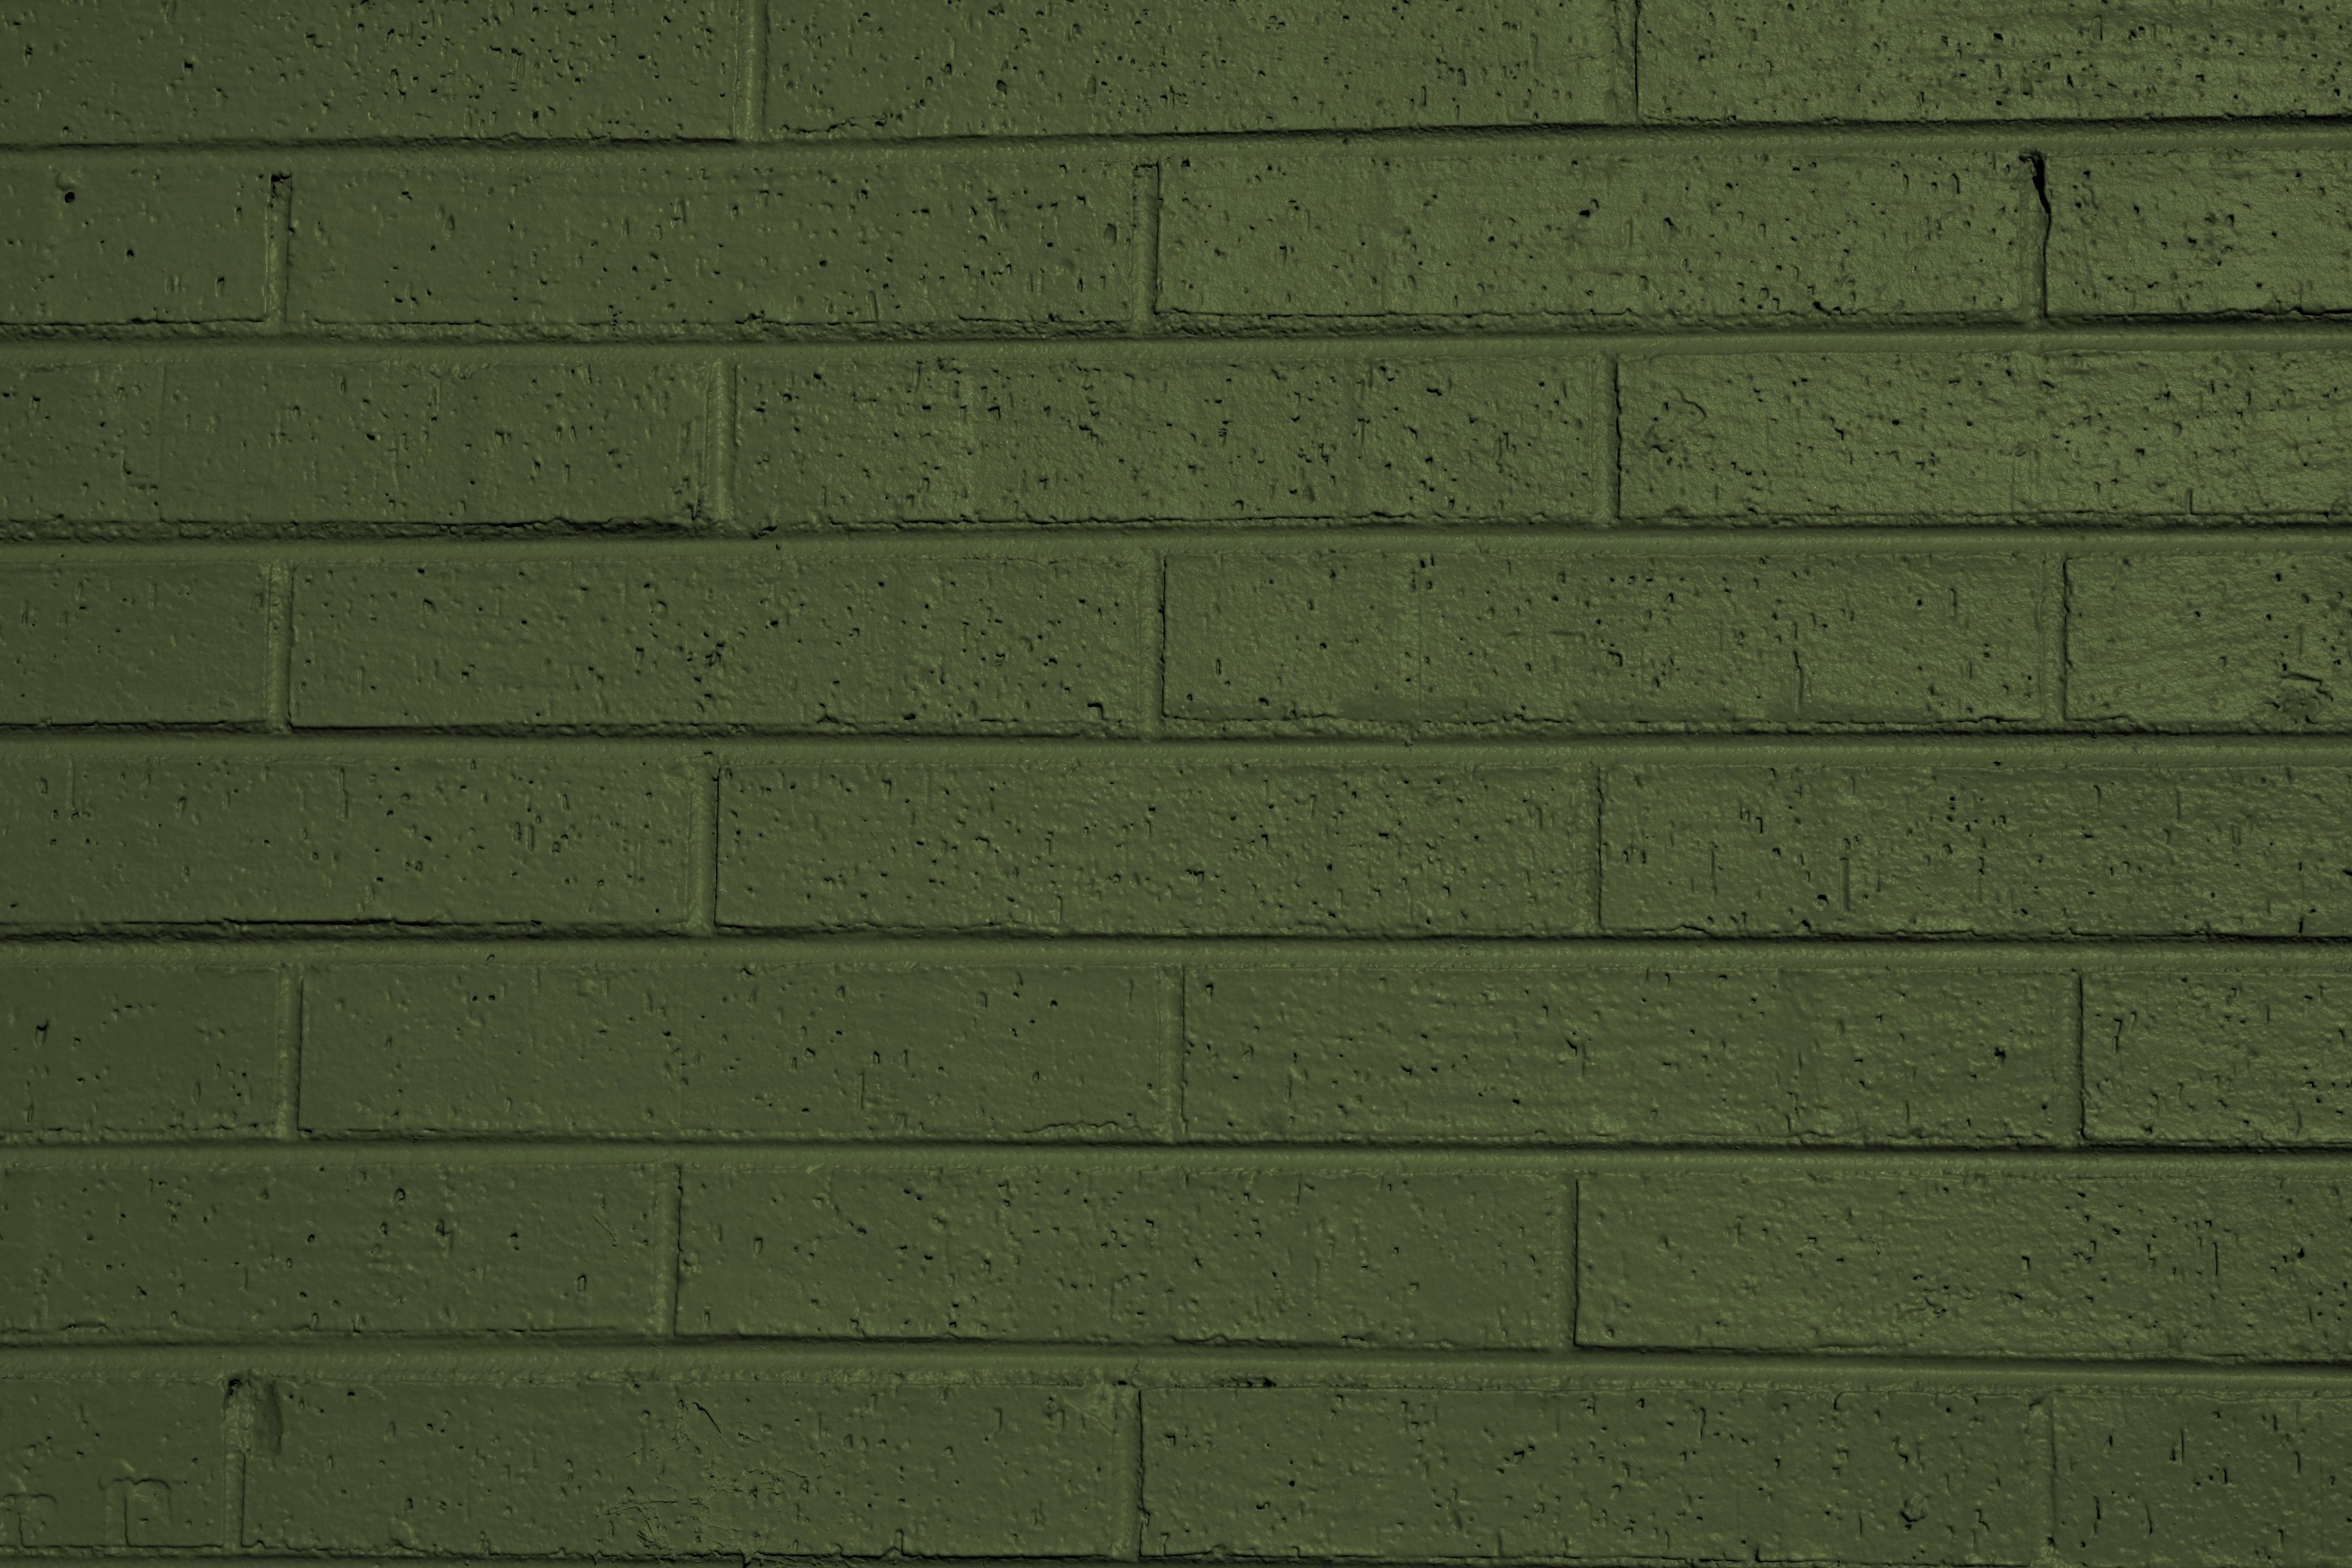 Olive Green Painted Brick Wall Texture Picture | Free Photograph | Photos  Public Domain